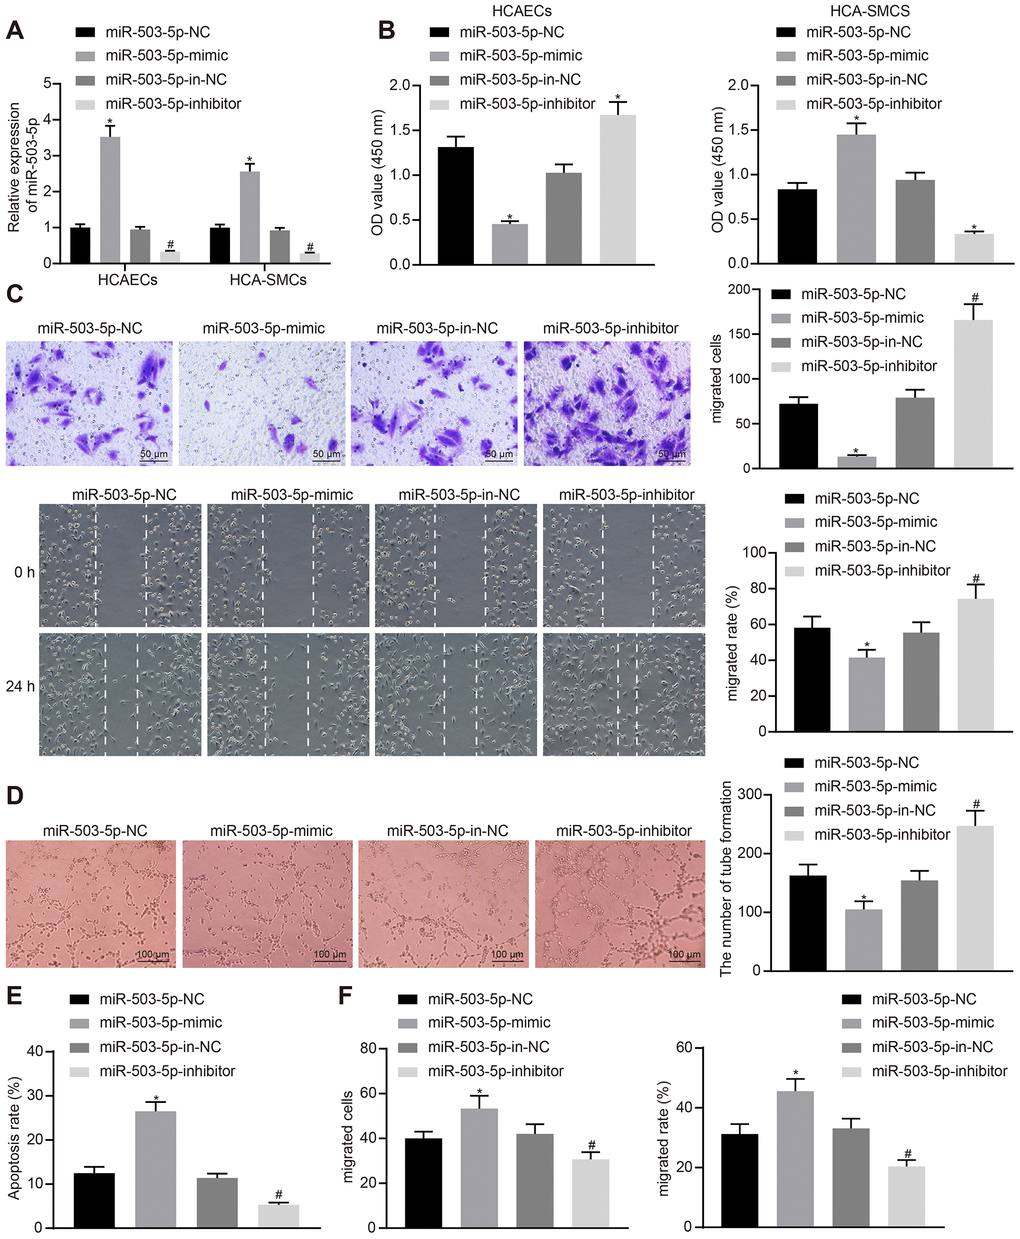 miR-503-5p inhibits proliferation, migration, and angiogenic abilities of HCAECs while promoting the proliferation and migration of HCASMCs. HCAECs and HCASMCs were treated with exogenous miR-503-5p mimic (with miR-mimic NC as a control) or exogenous miR-503-5p inhibitor (with miR-inhibitor NC as a control). (A) The expression of miR-503-5p (normalized to U6) in HCAECs and HCASMCs determined by RT-qPCR. (B) The proliferation of HCAECs and HCASMCs detected by CCK-8 assay. (C) The migration of HCAECs detected by transwell migration assays and scratch test. (D) Vessel-like tubes formed in HCAECs detected by Matrigel-based angiogenesis assays. (E) Apoptosis of HCAECs detected by flow cytometry. (F) The migration of HCASMCs detected by transwell migration assays and scratch test. Values obtained from three independent experiments in triplicate were analyzed by one-way ANOVA followed by Tukey's post hoc test among three or more groups. *p p 